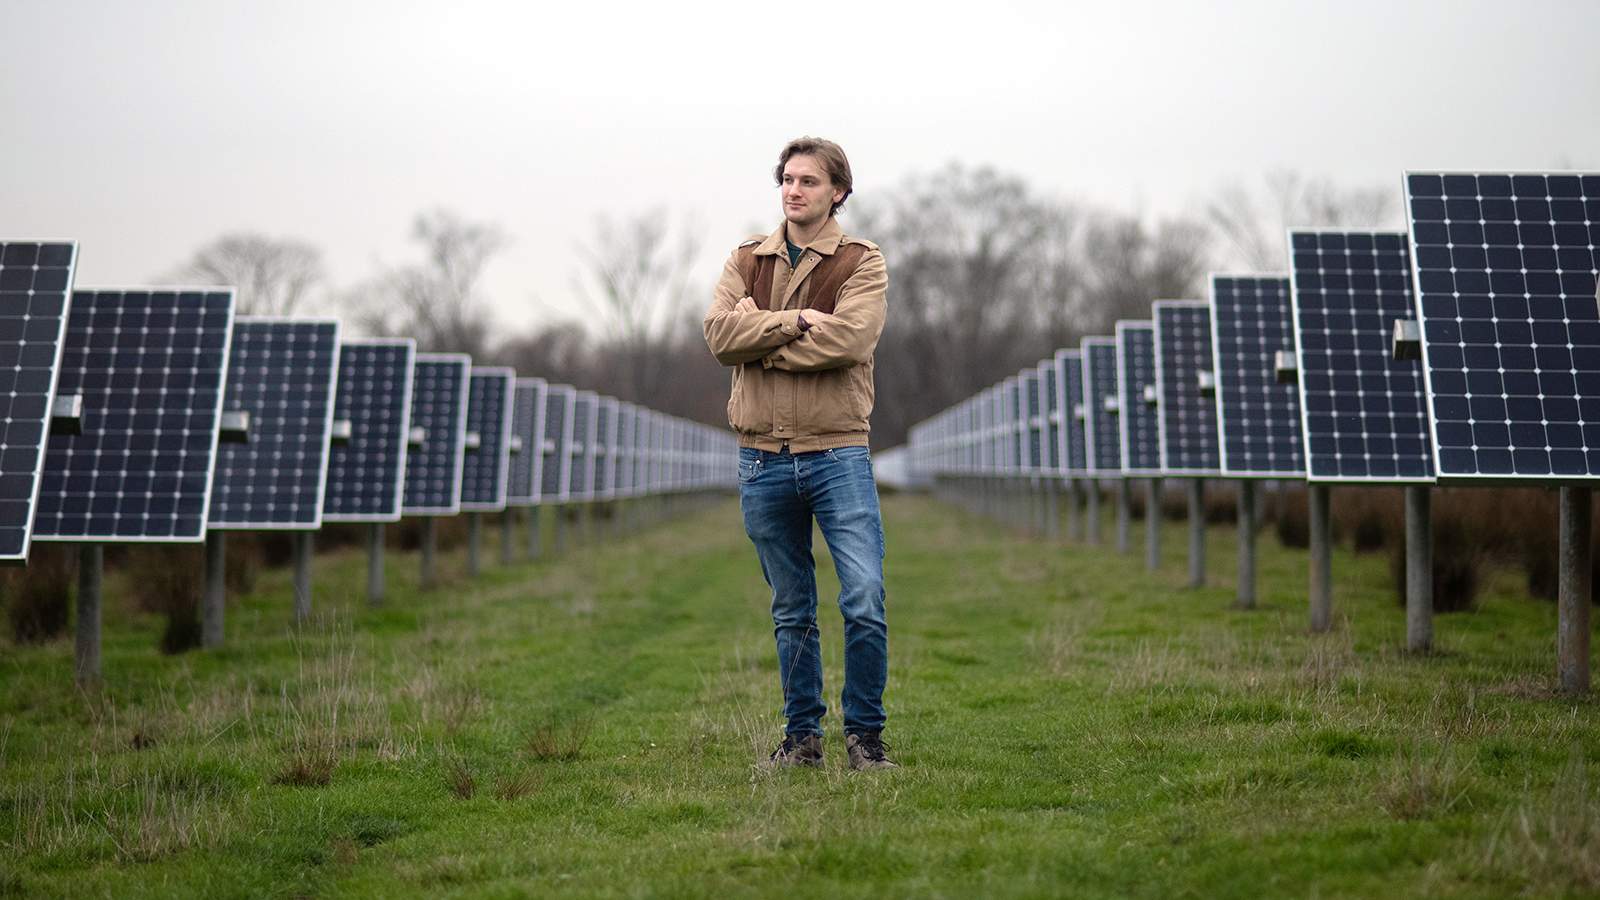 Wilson Ricks, first author of the study, at the solar array at Princeton University. (Photo by Bumper DeJesus)